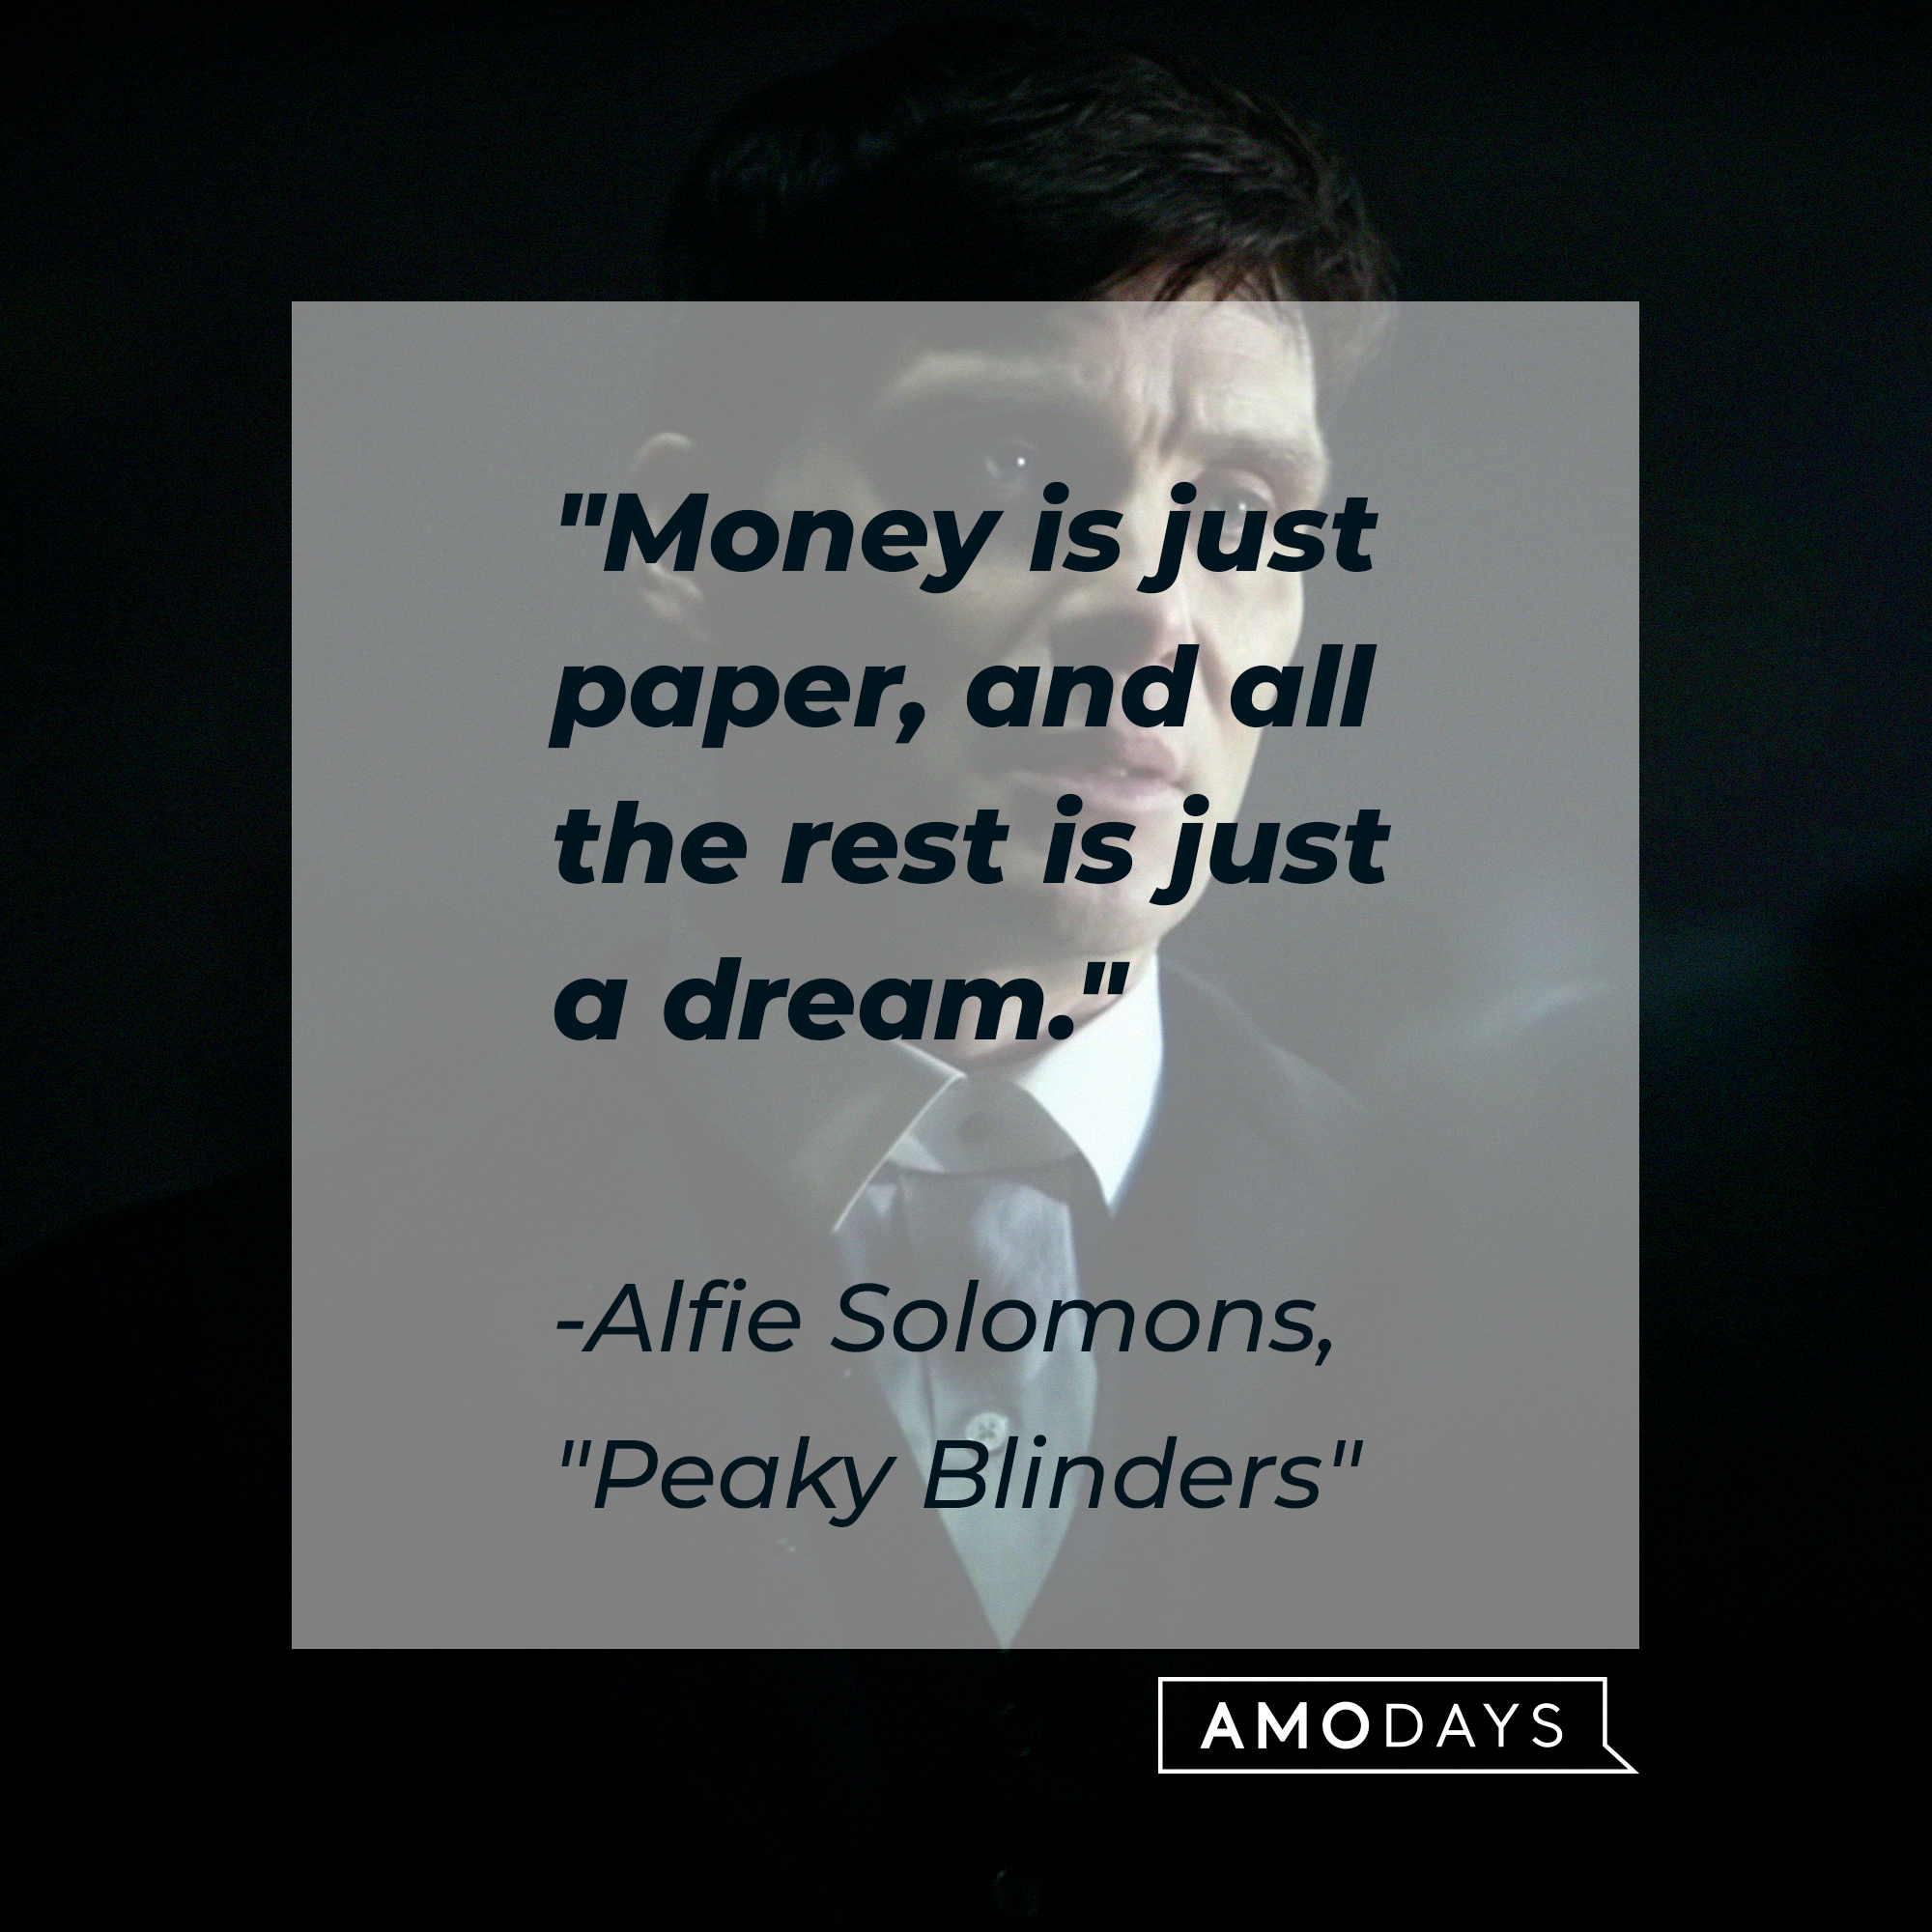 Alfie Solomons’s quote: "Money is just paper, and all the rest is just a dream." | Source: facebook.com/PeakyBlinders